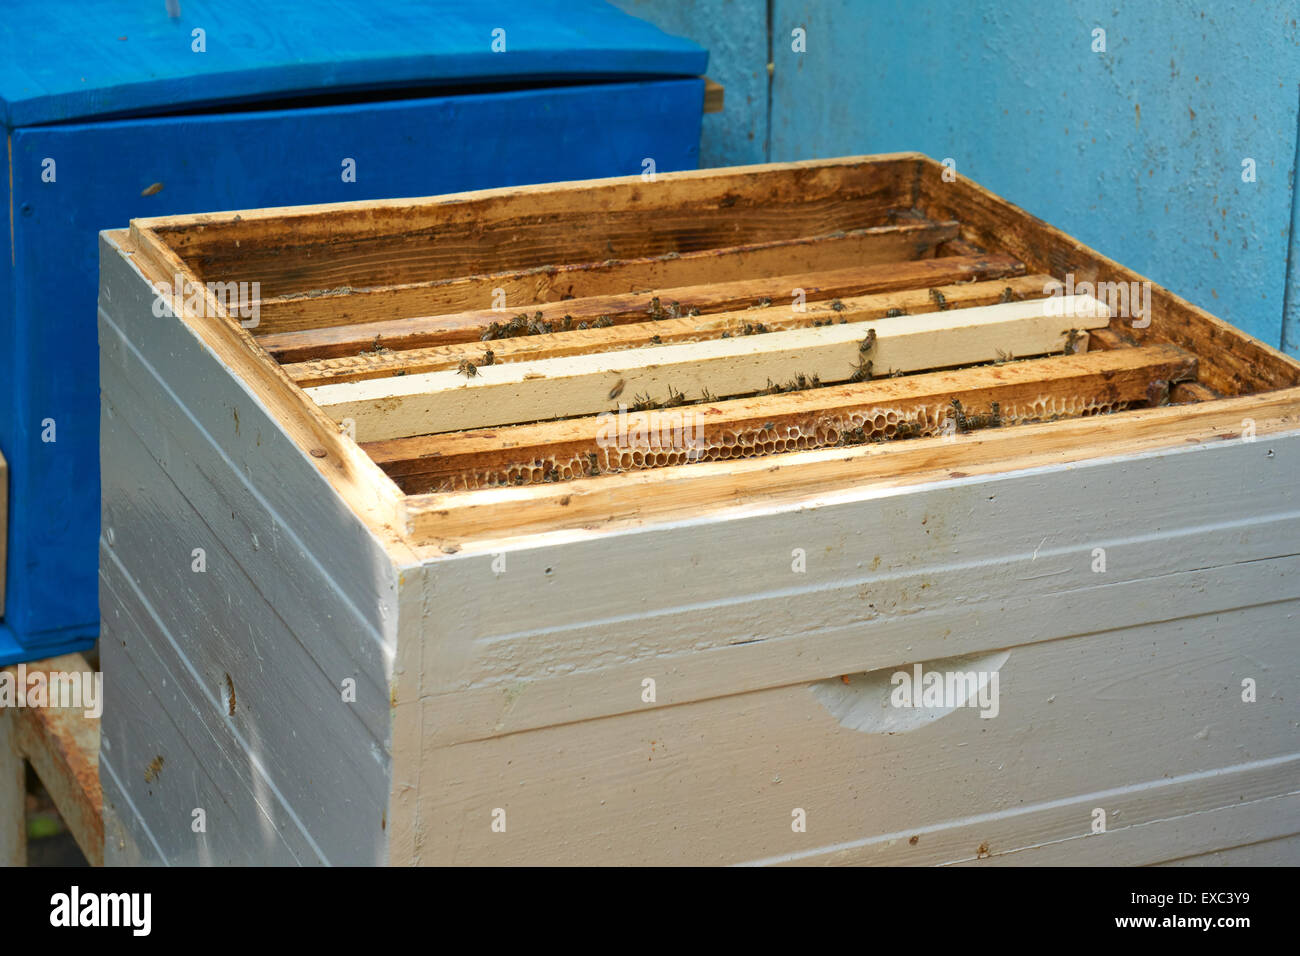 Upper view on the open beehive with frames in it Stock Photo